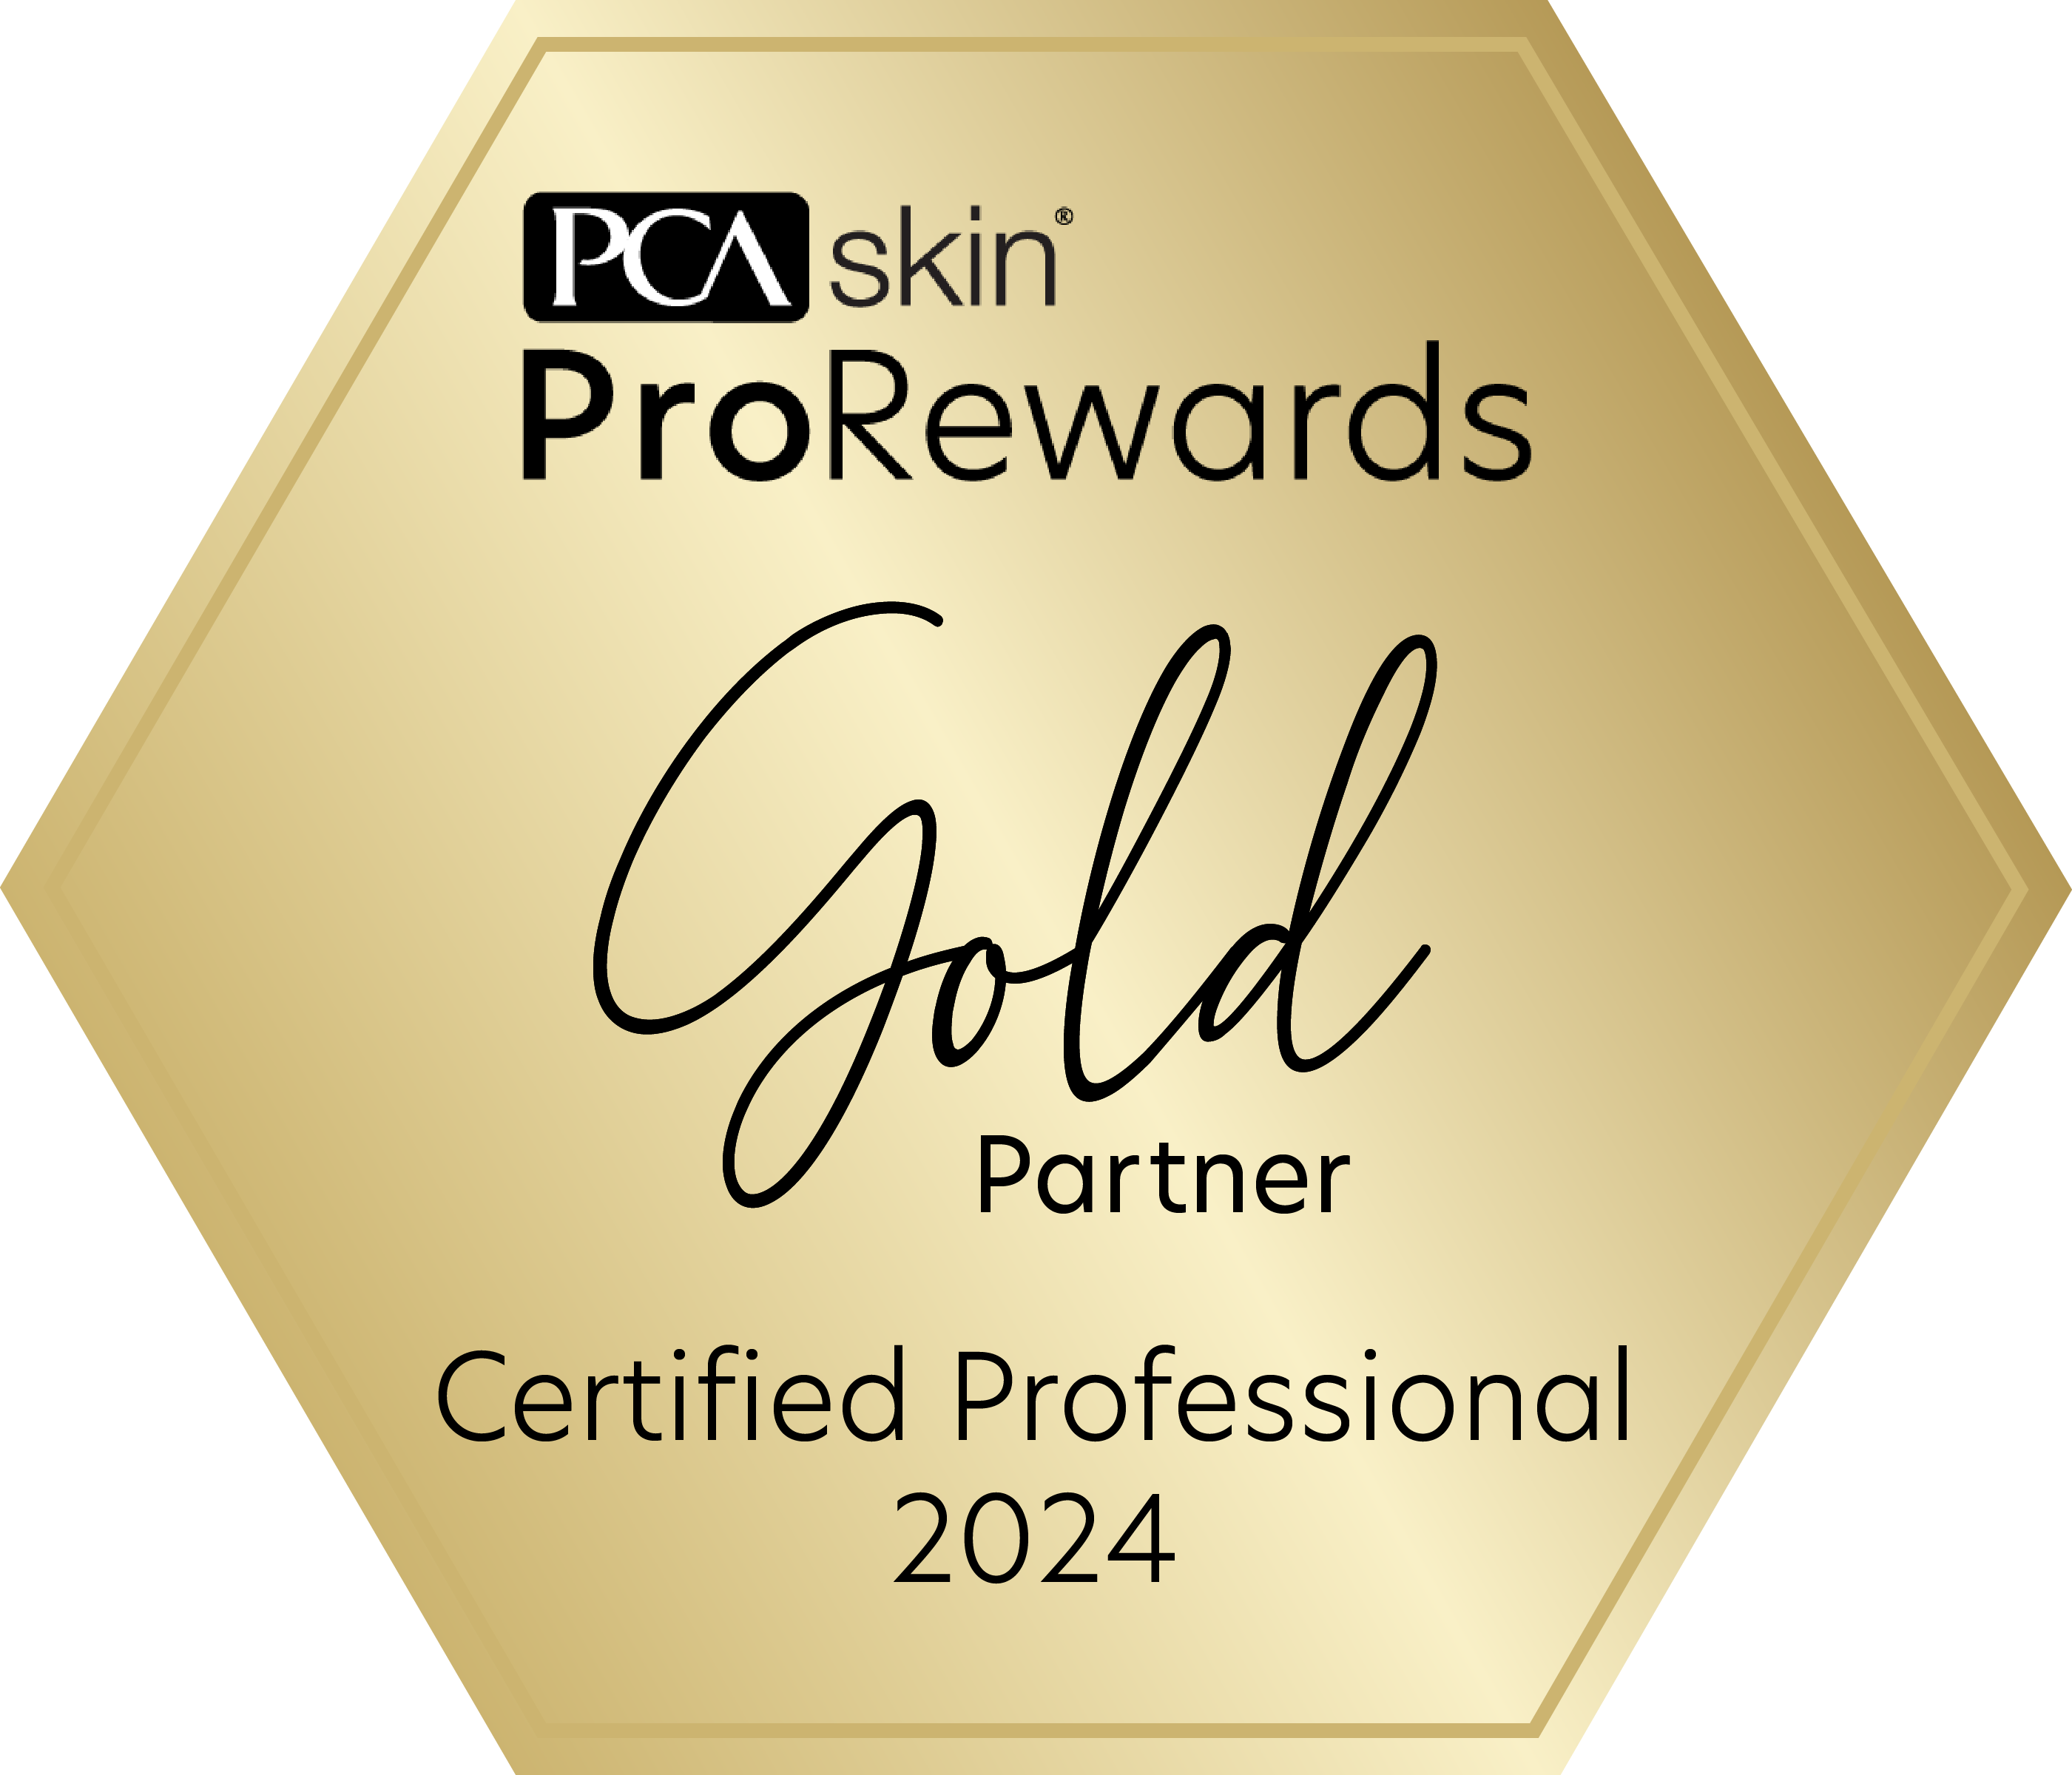 PCA Skin ProReward- Gold Partner- Certified Professional 2024 for Treasure Valley Aesthetics and Wellness